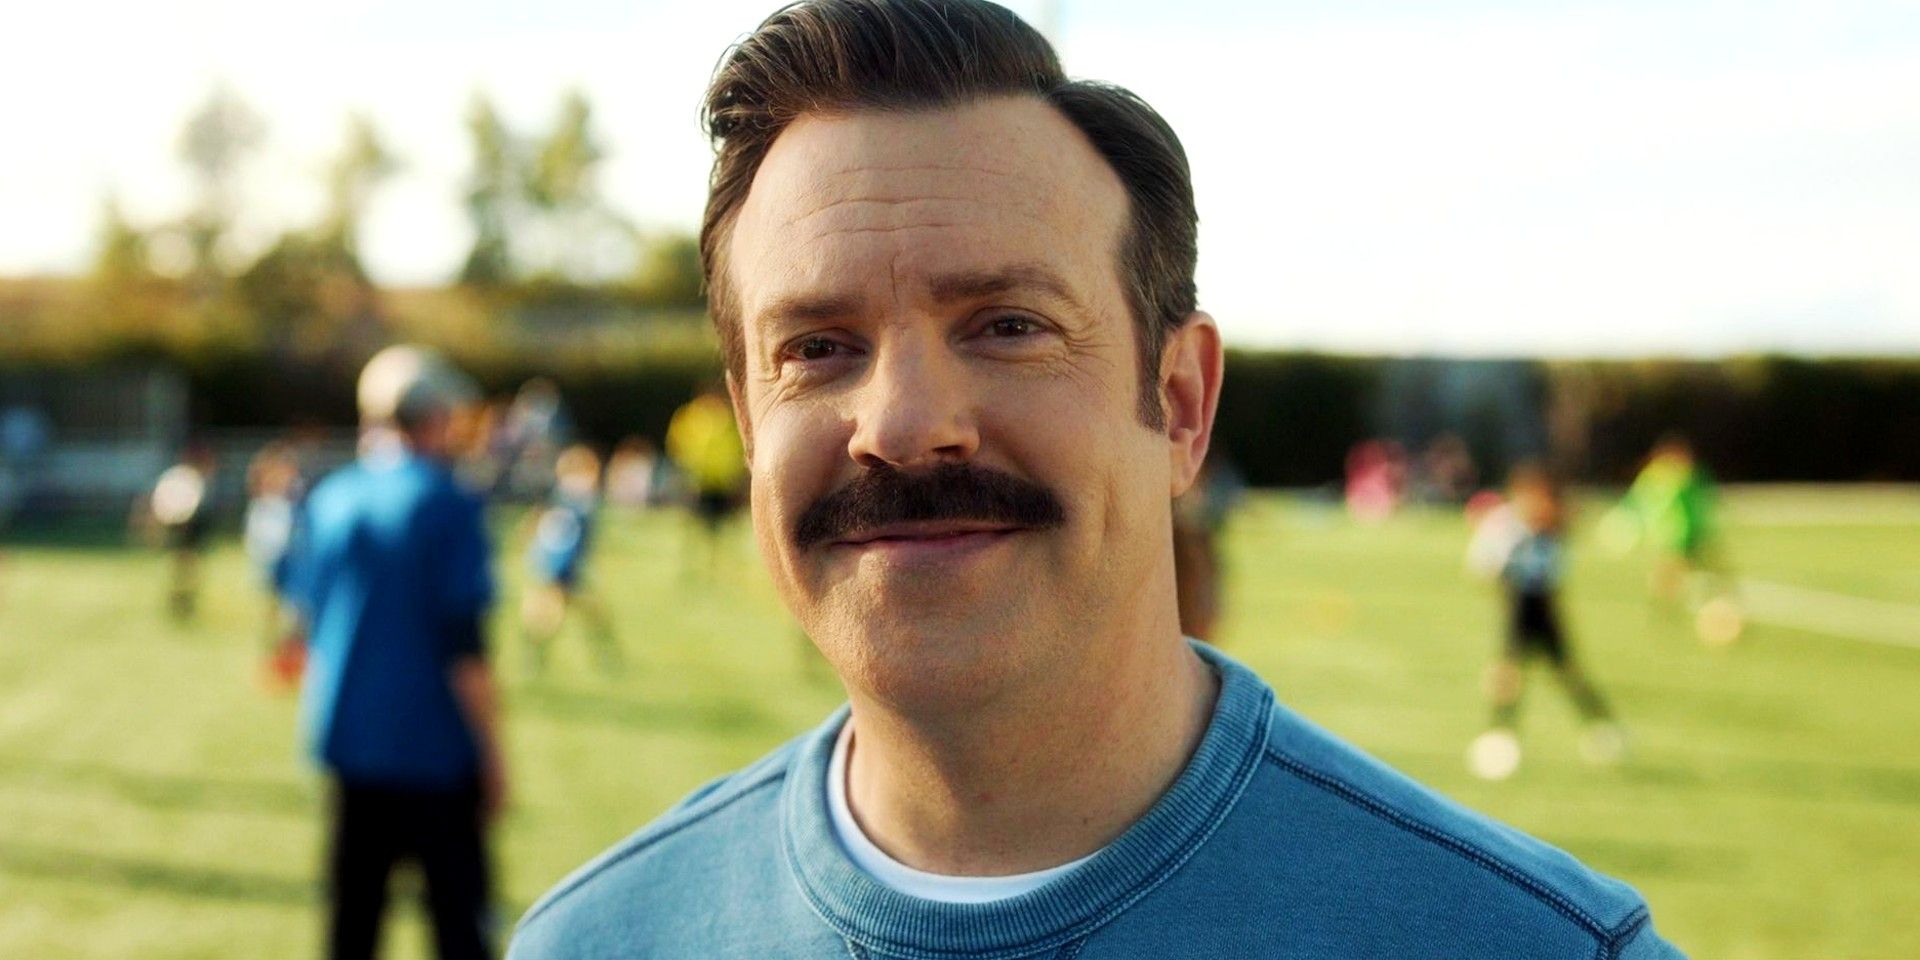 Jason Sudeikis as Ted Lasso in a scene from Ted Lasso season 3, episode 12